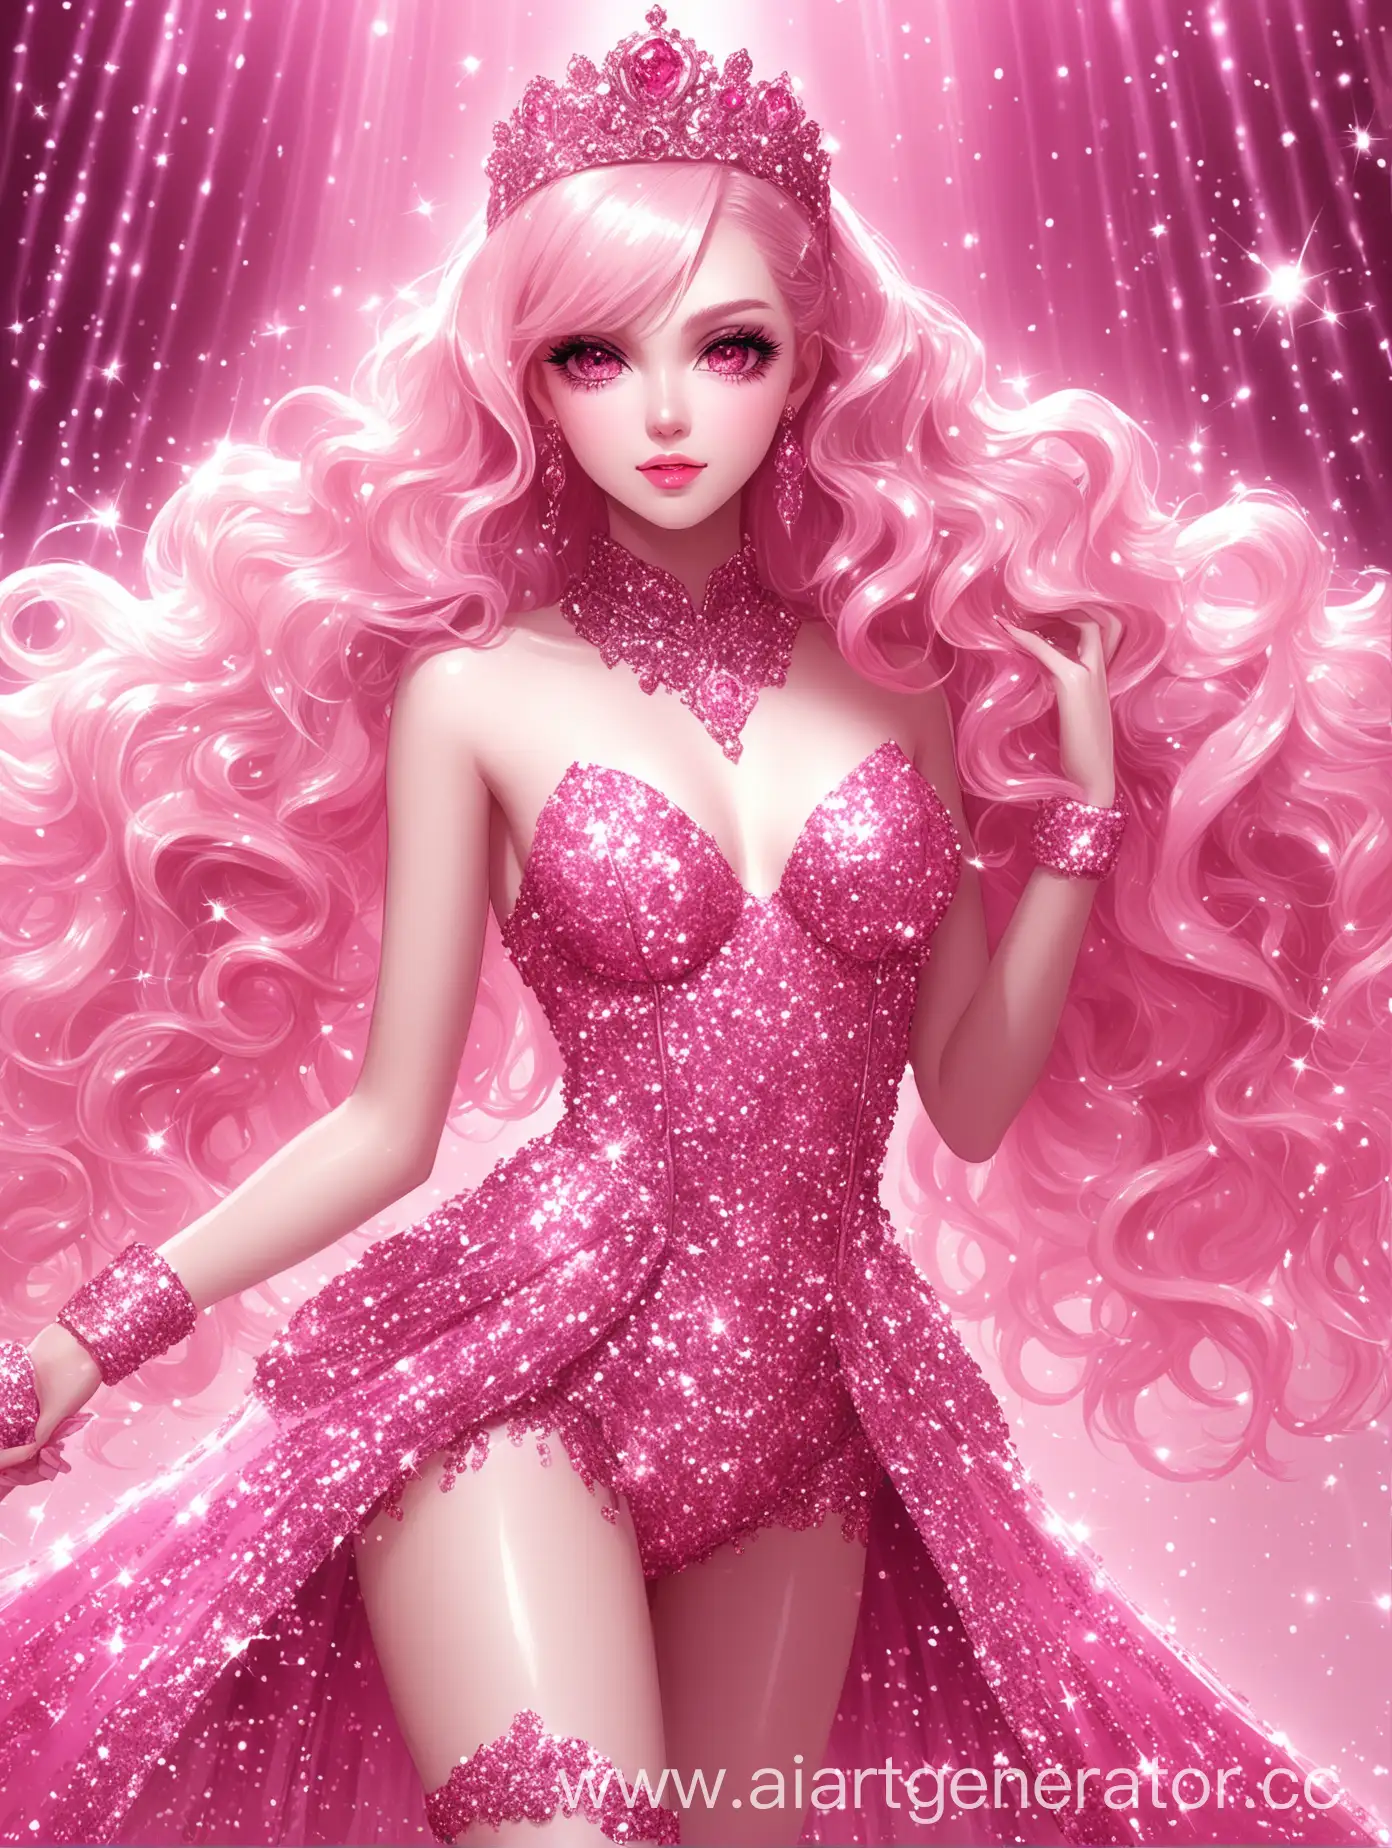 Luxurious-Elite-Escort-Academy-with-Pink-Glamour-and-Glitter